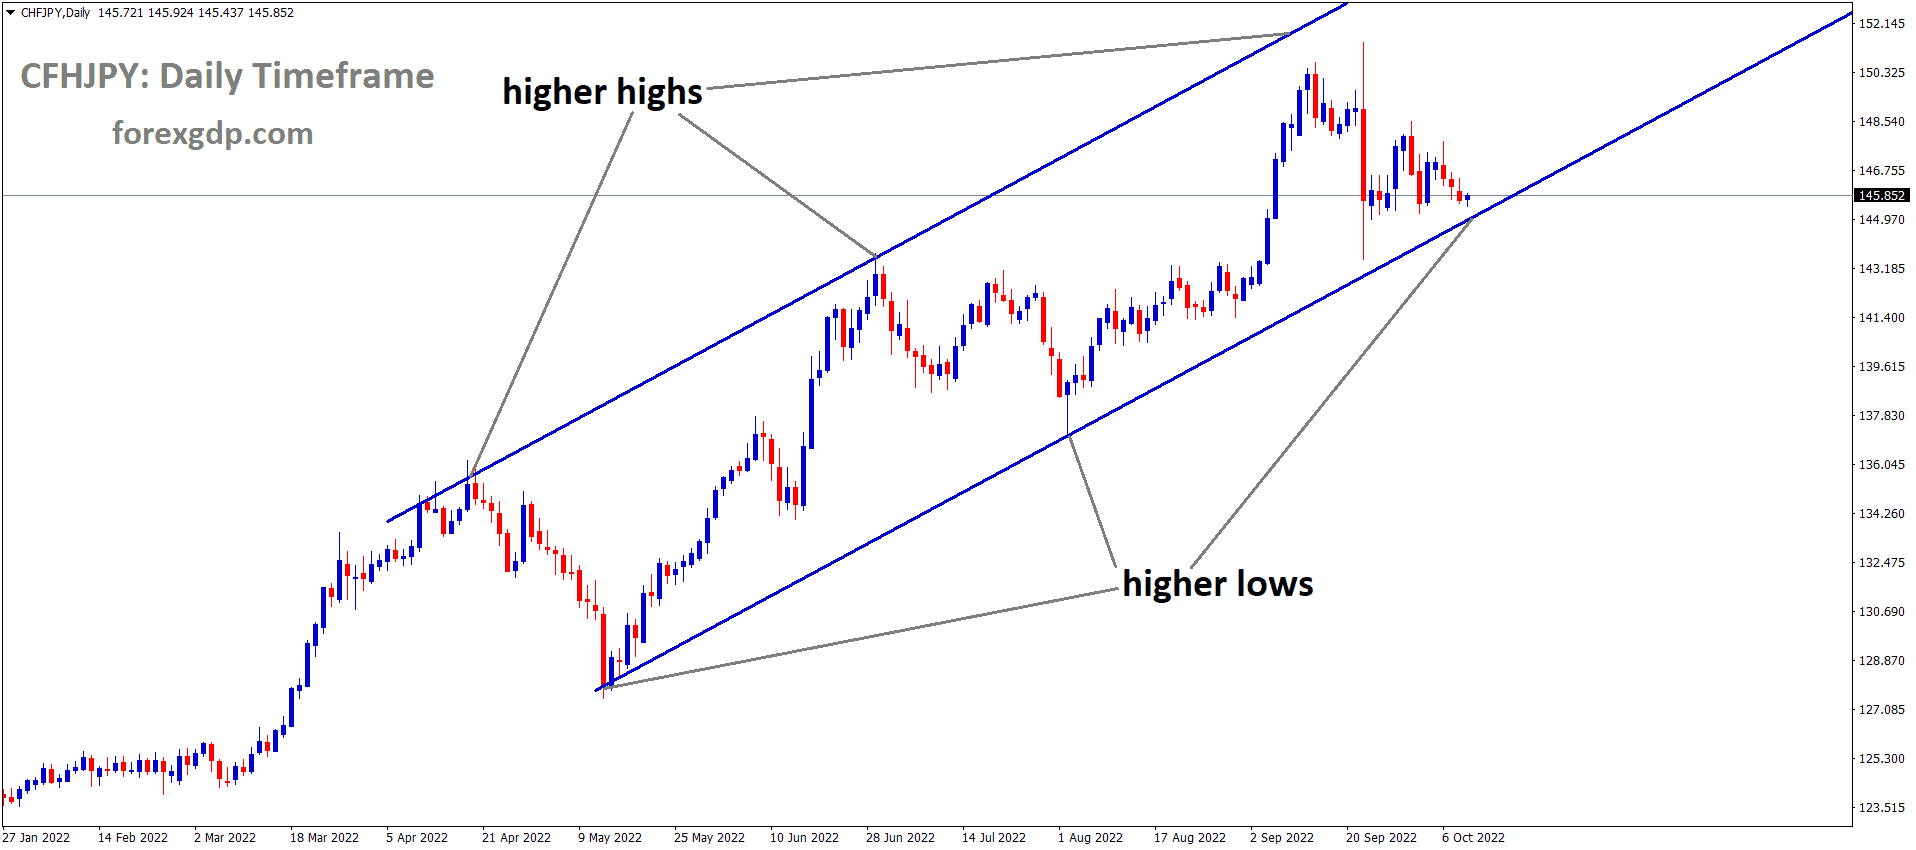 CHFJPY is moving in an Ascending channel and the market has reached the higher low area of the channel 1